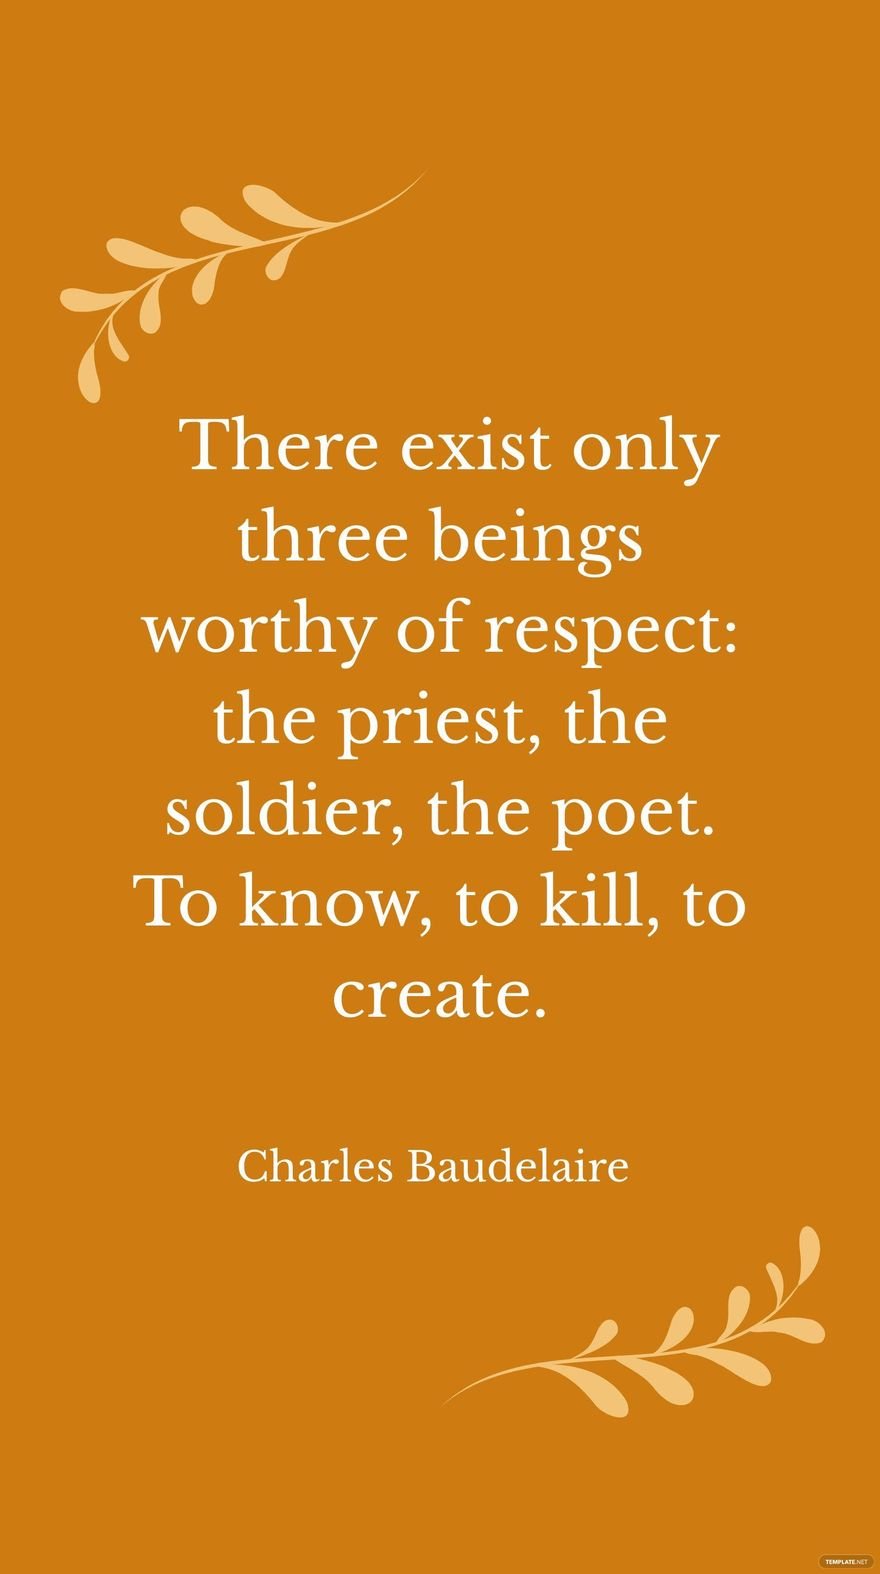 Free Charles Baudelaire- There exist only three beings worthy of respect: the priest, the soldier, the poet. To know, to kill, to create. in JPG